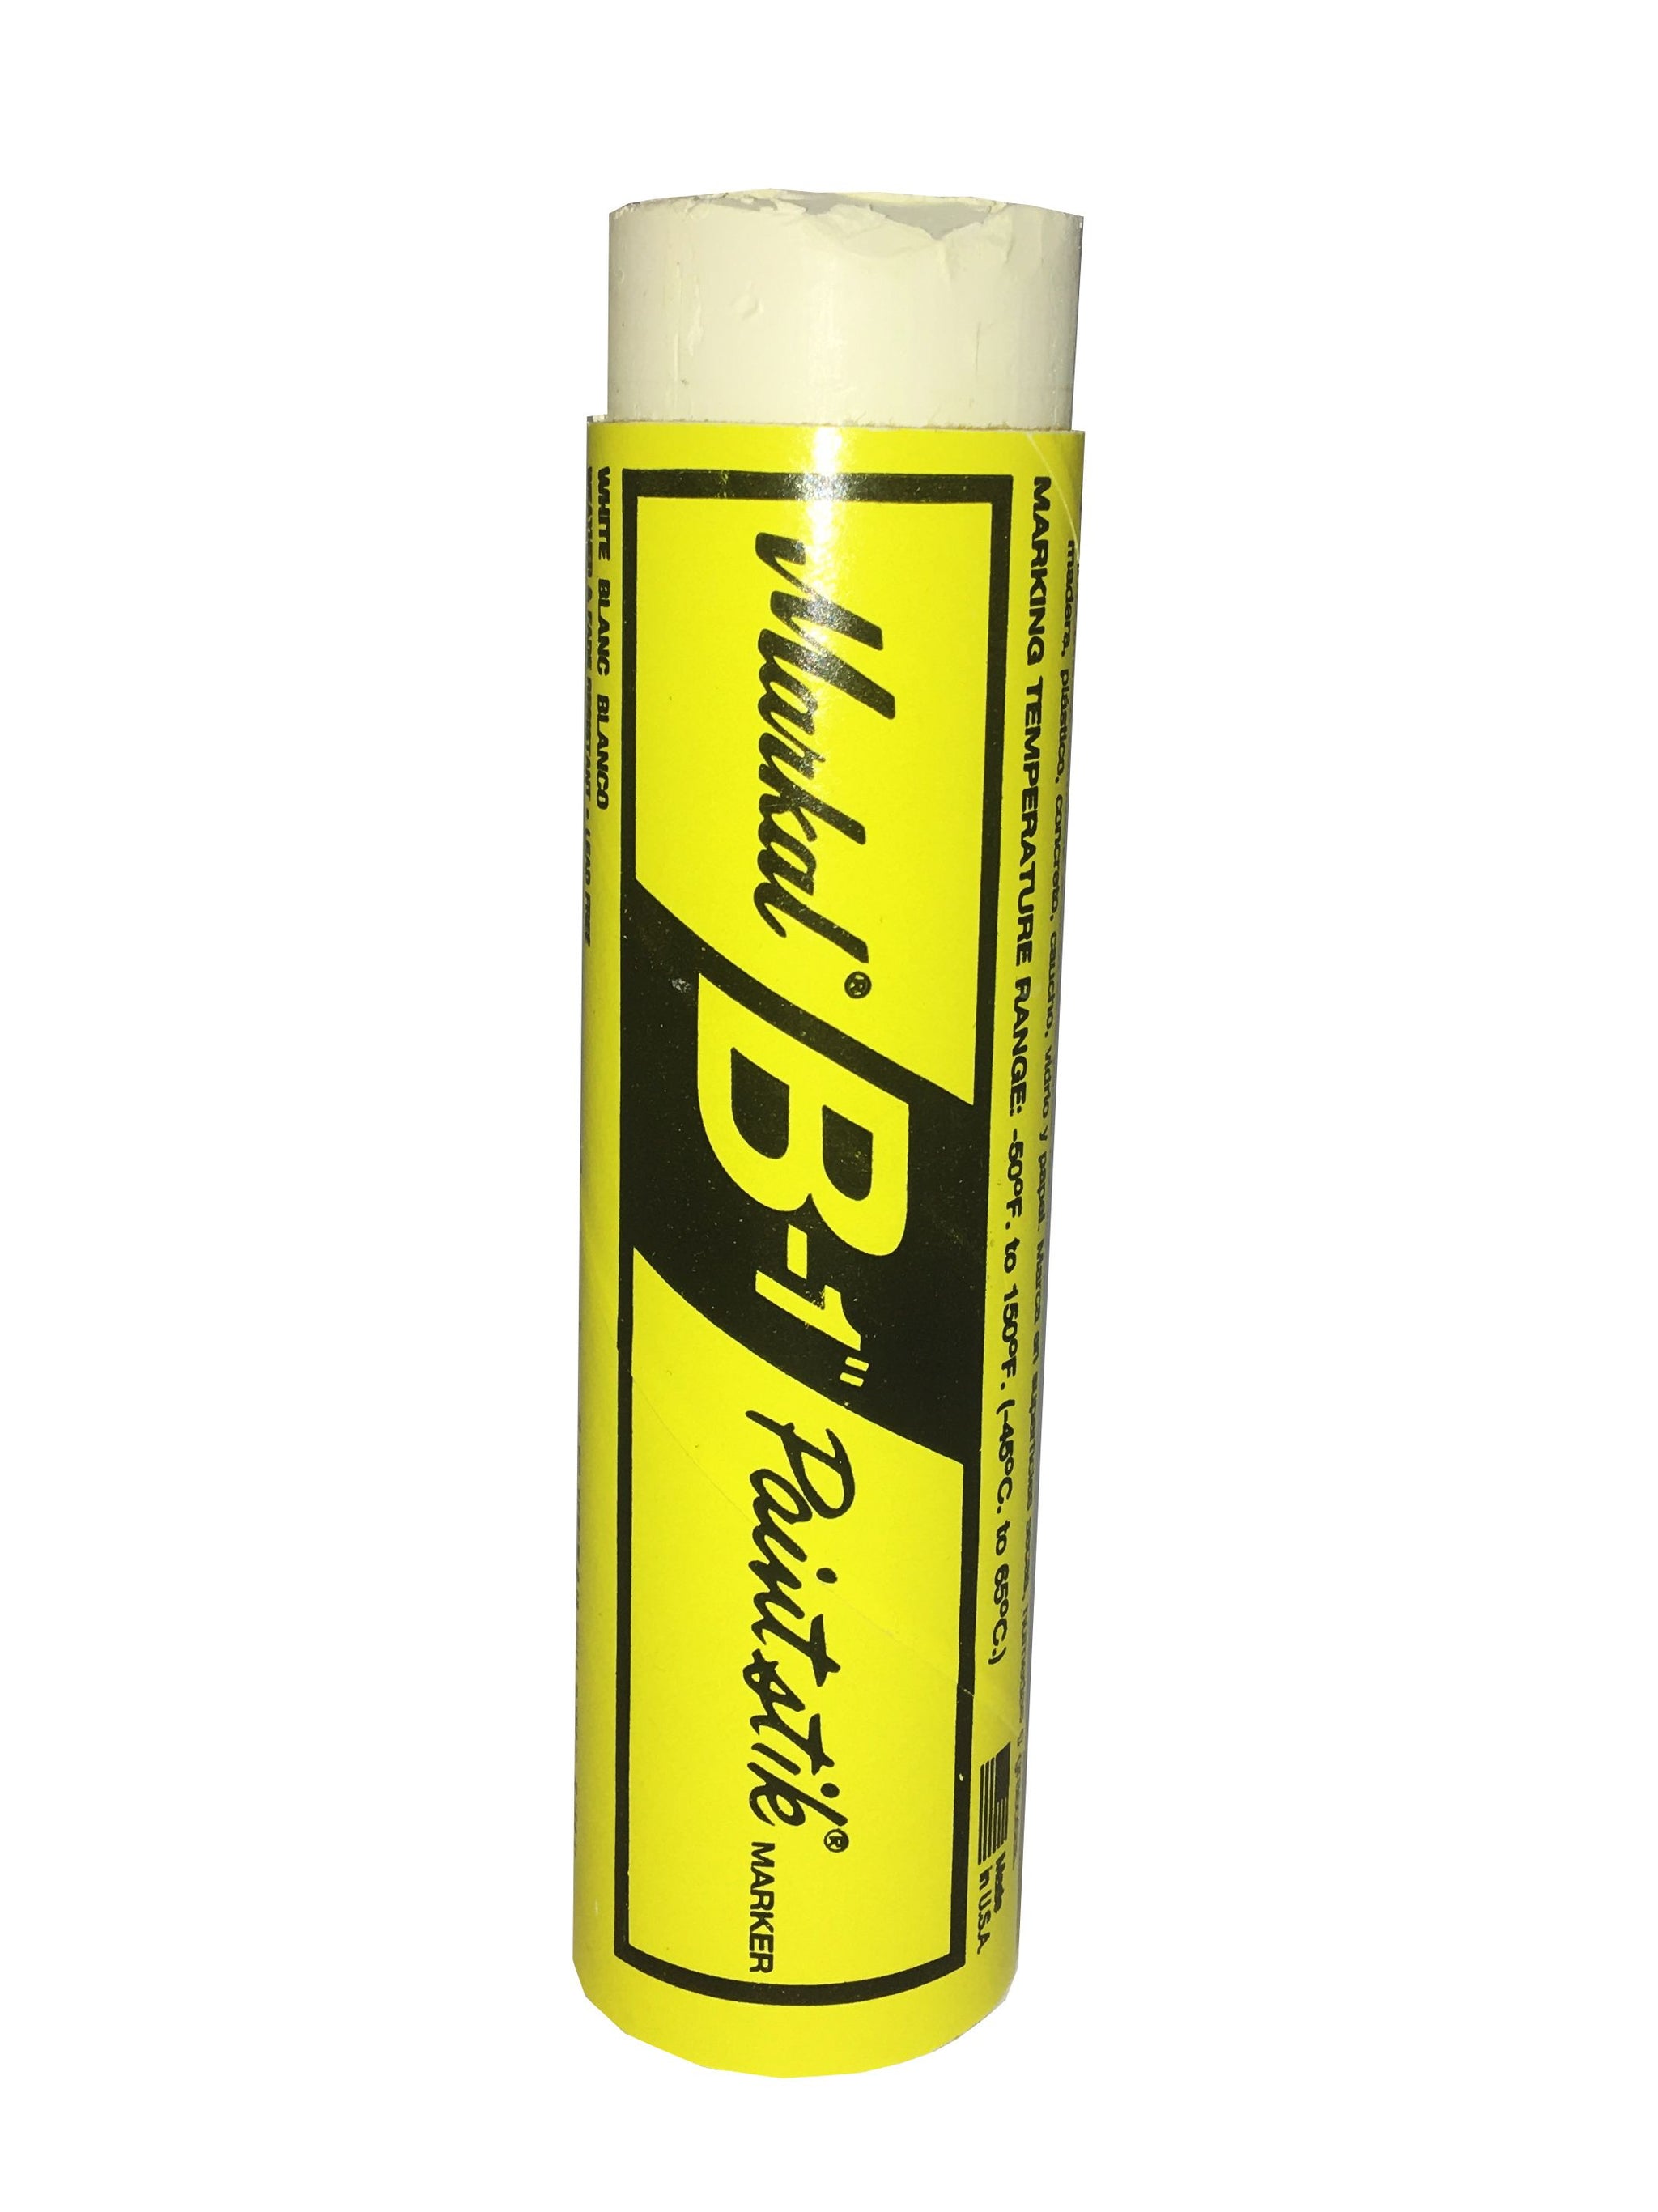 Markal 3-Pack Painstik Yellow Solid Paint Marker